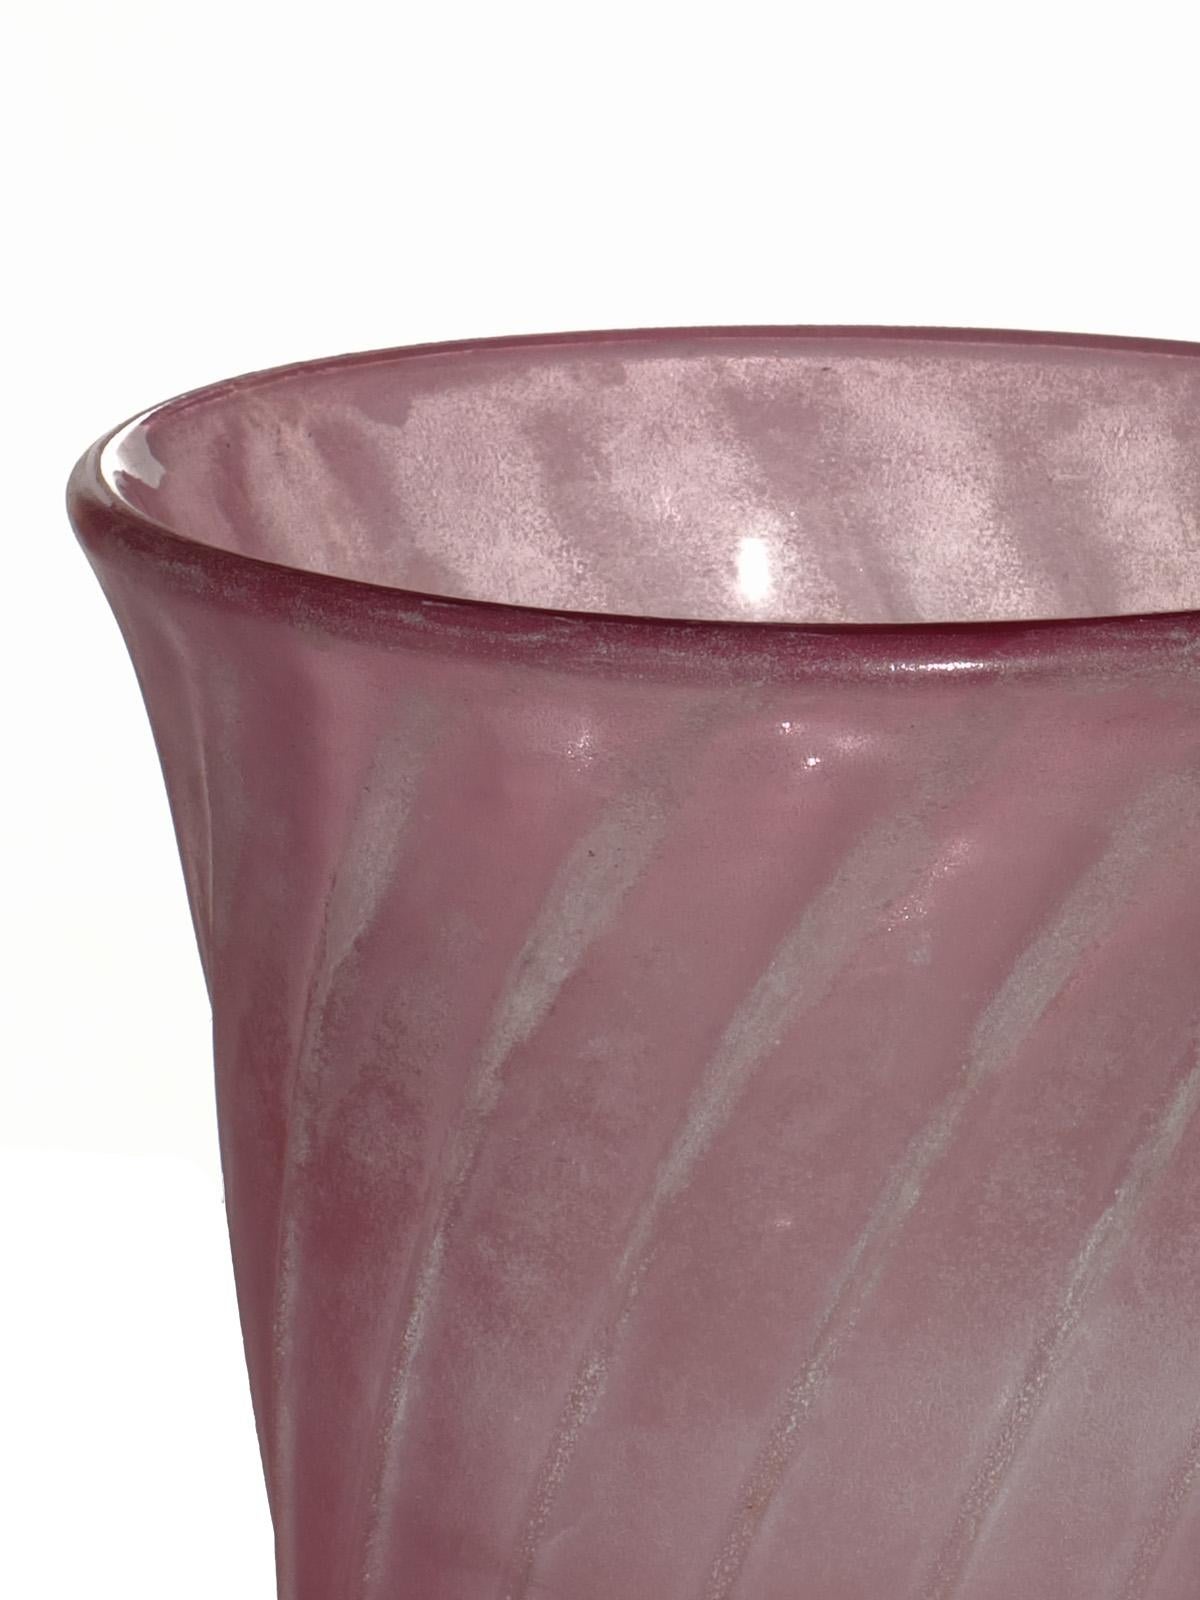 Pink glass vase
Perfect condition.